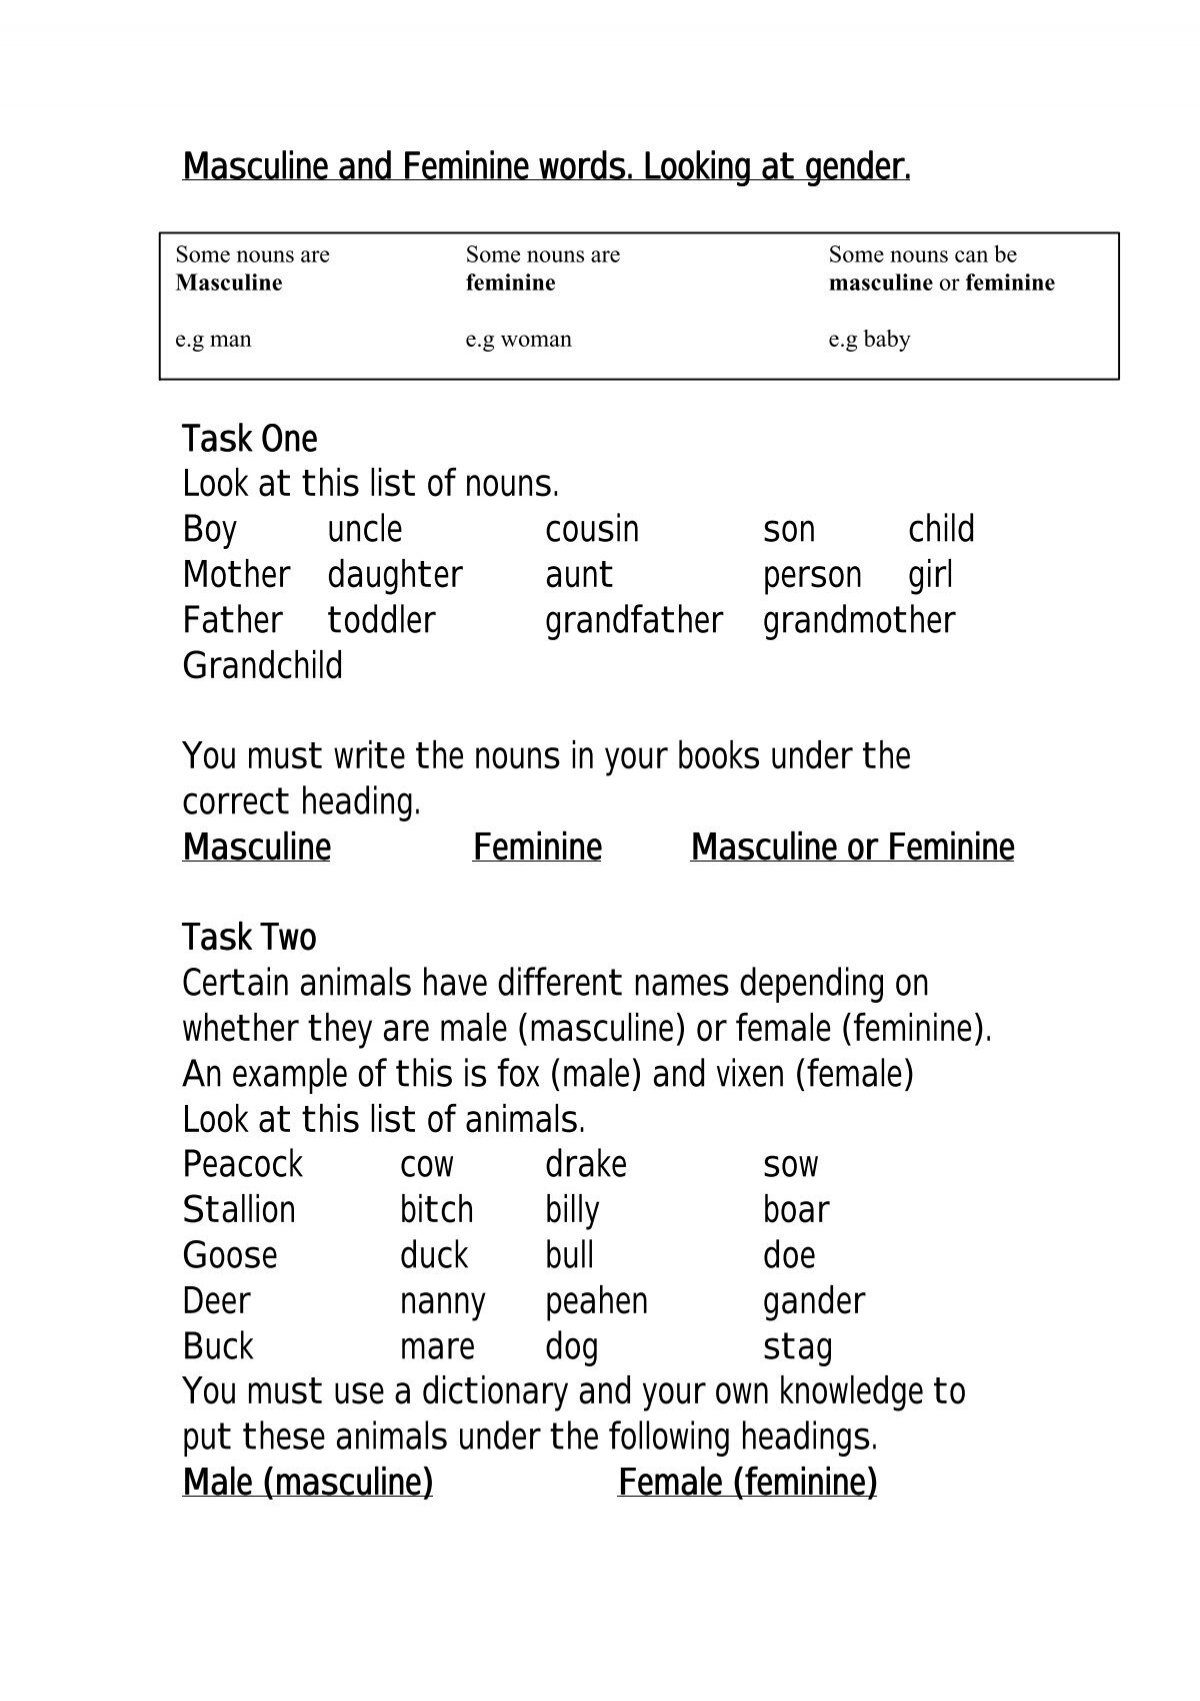 Masculine And Feminine Words Looking At Gender Primary